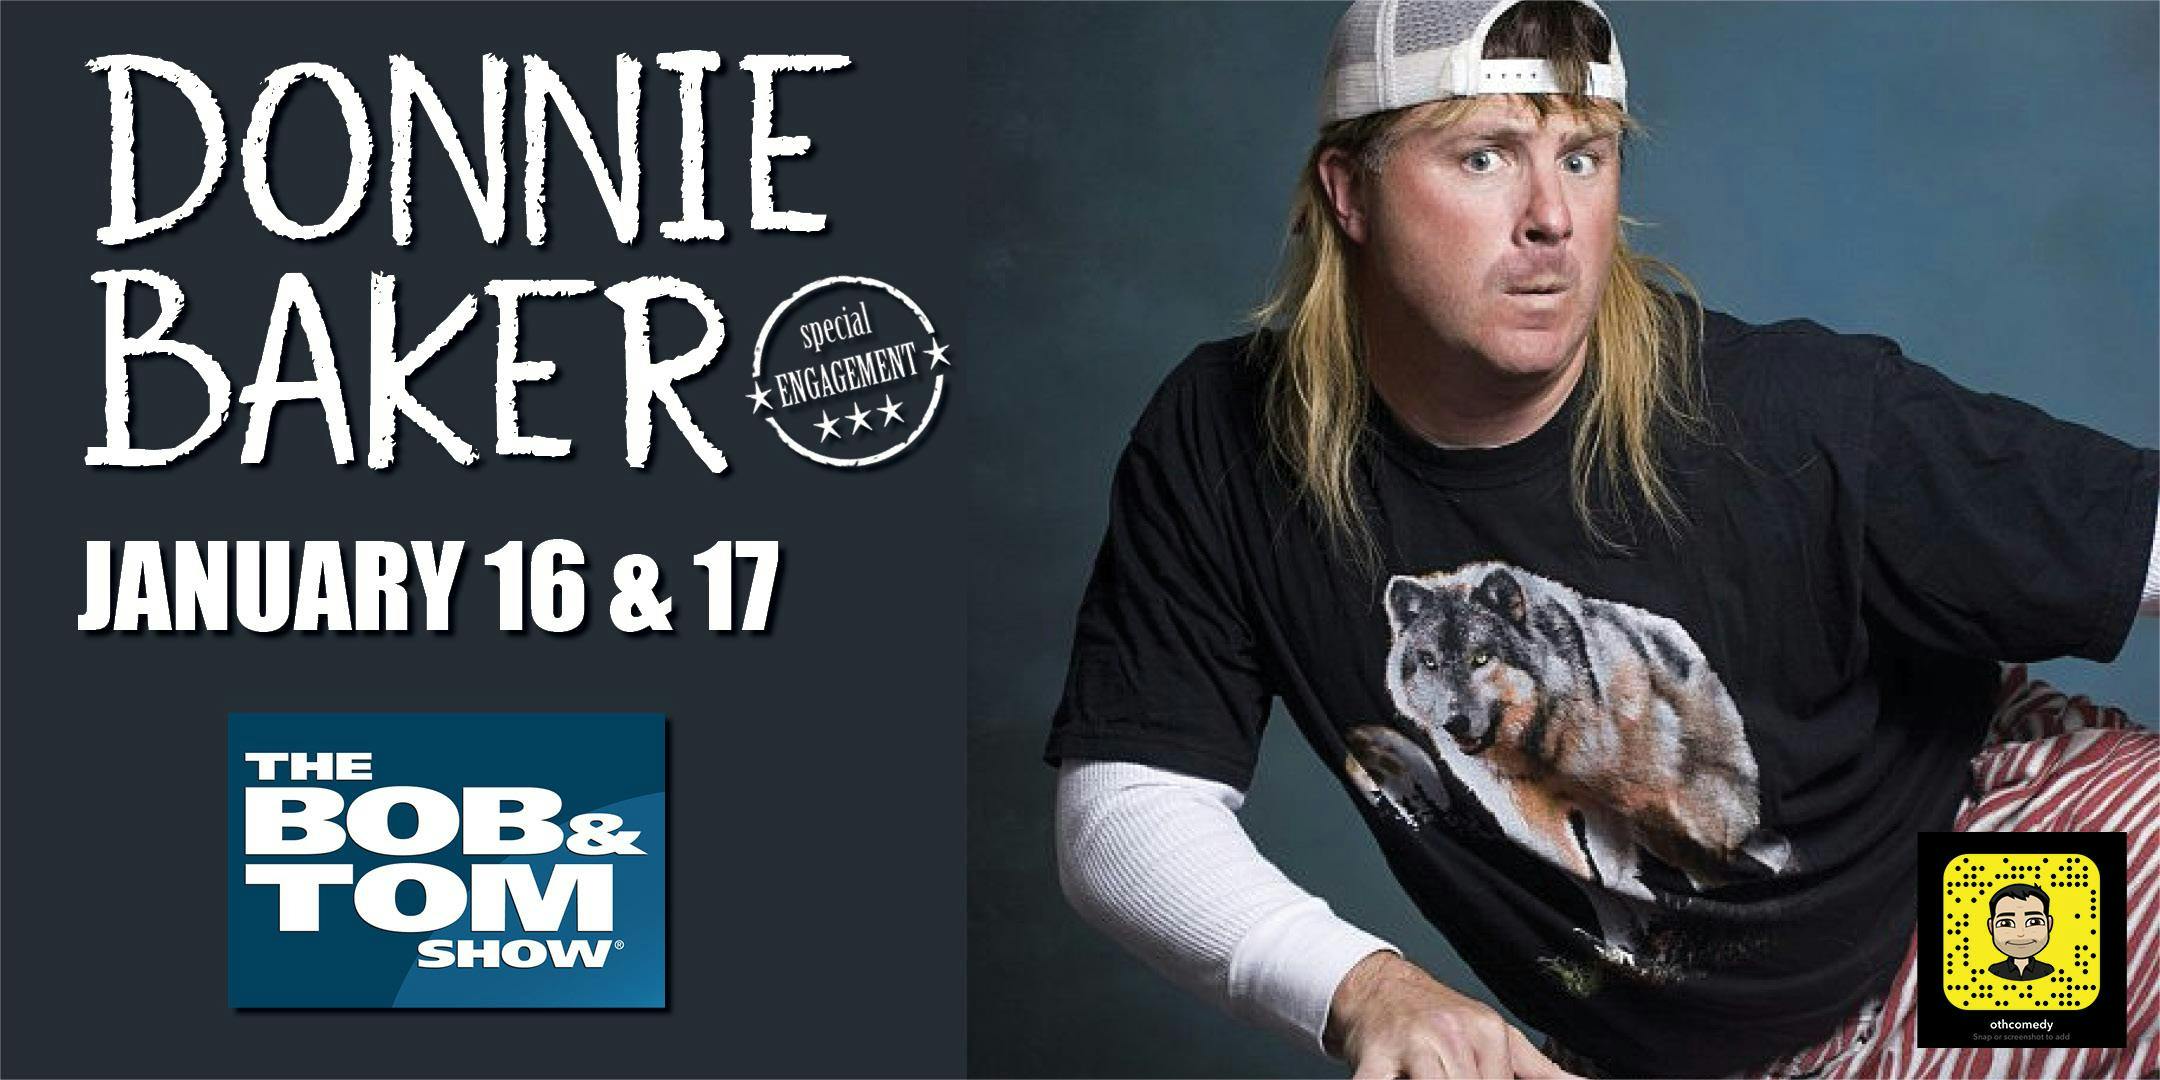 Donnie Baker live in Naples, FL Off The Hook Comedy Club 